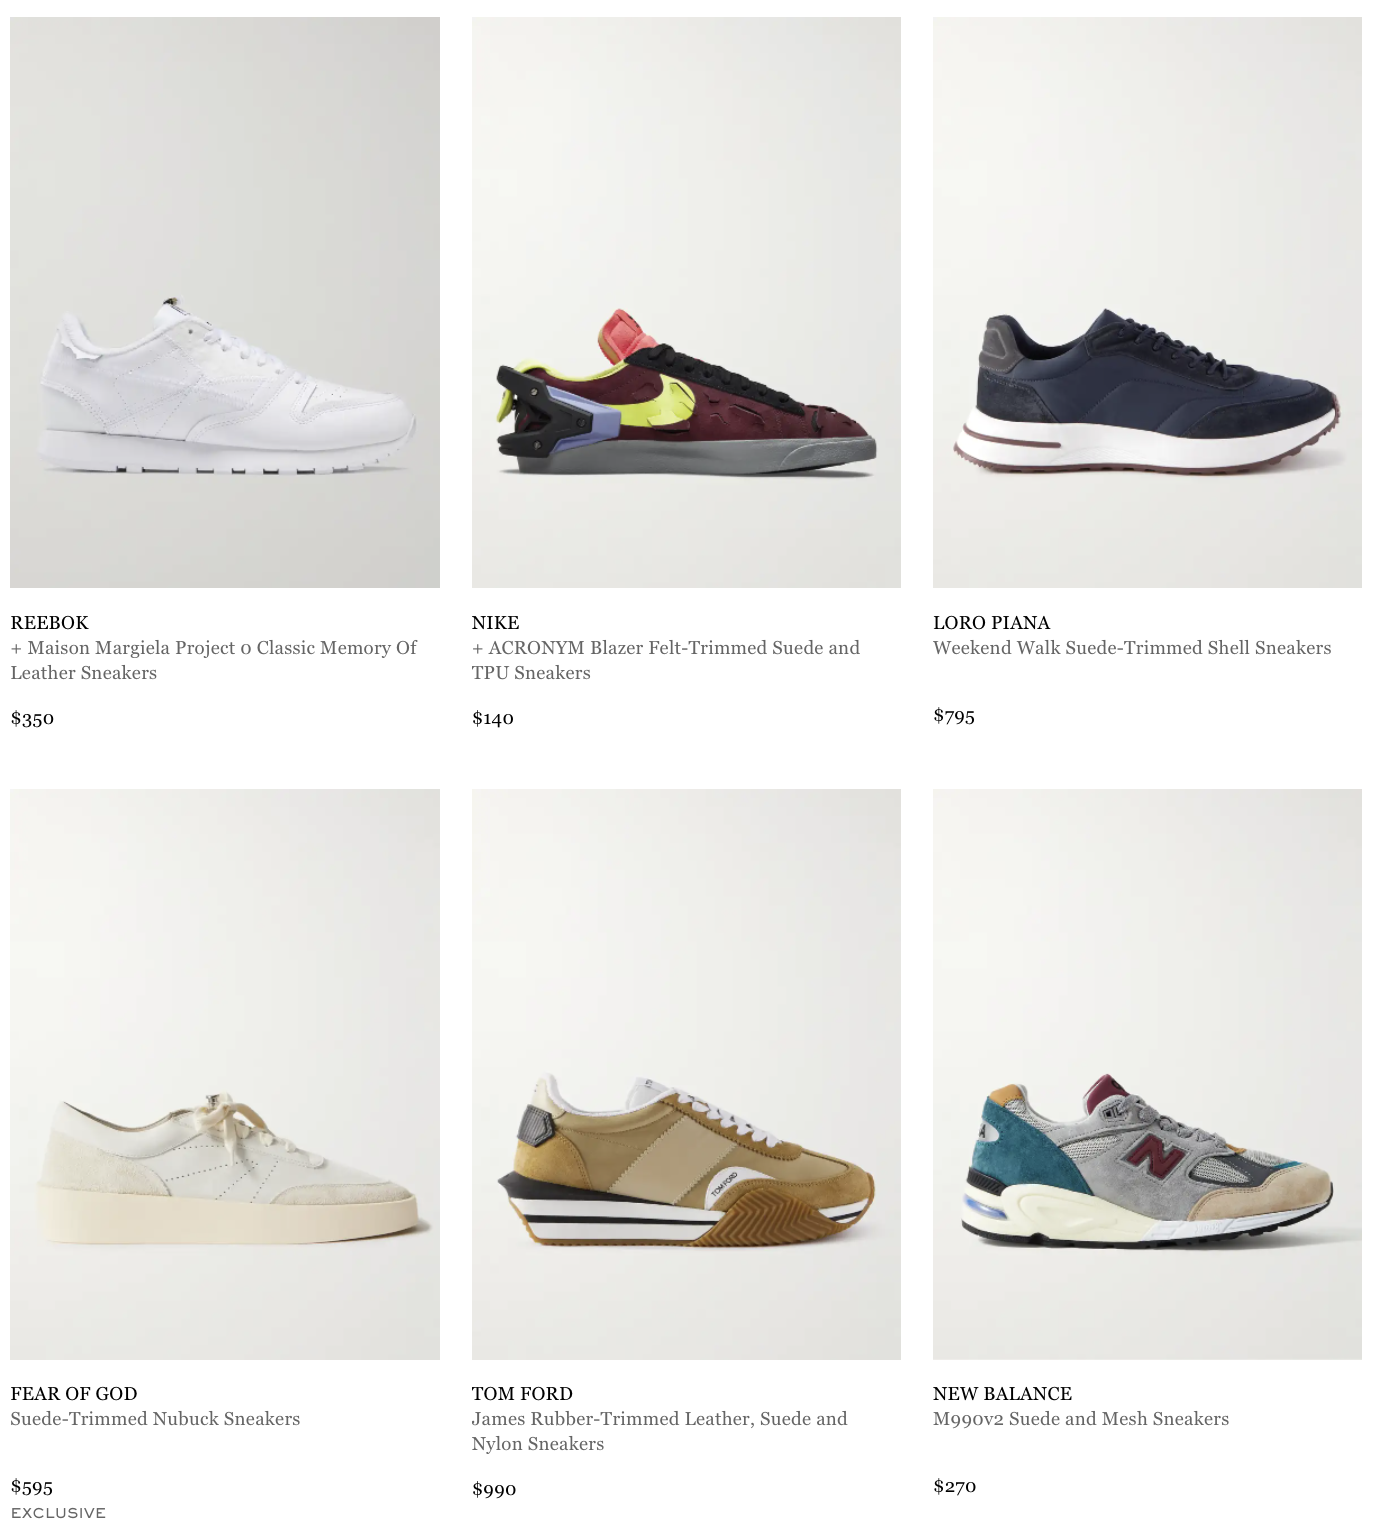 Shoe Rental Sites, They Are Here To Stay – Reshoevn8r